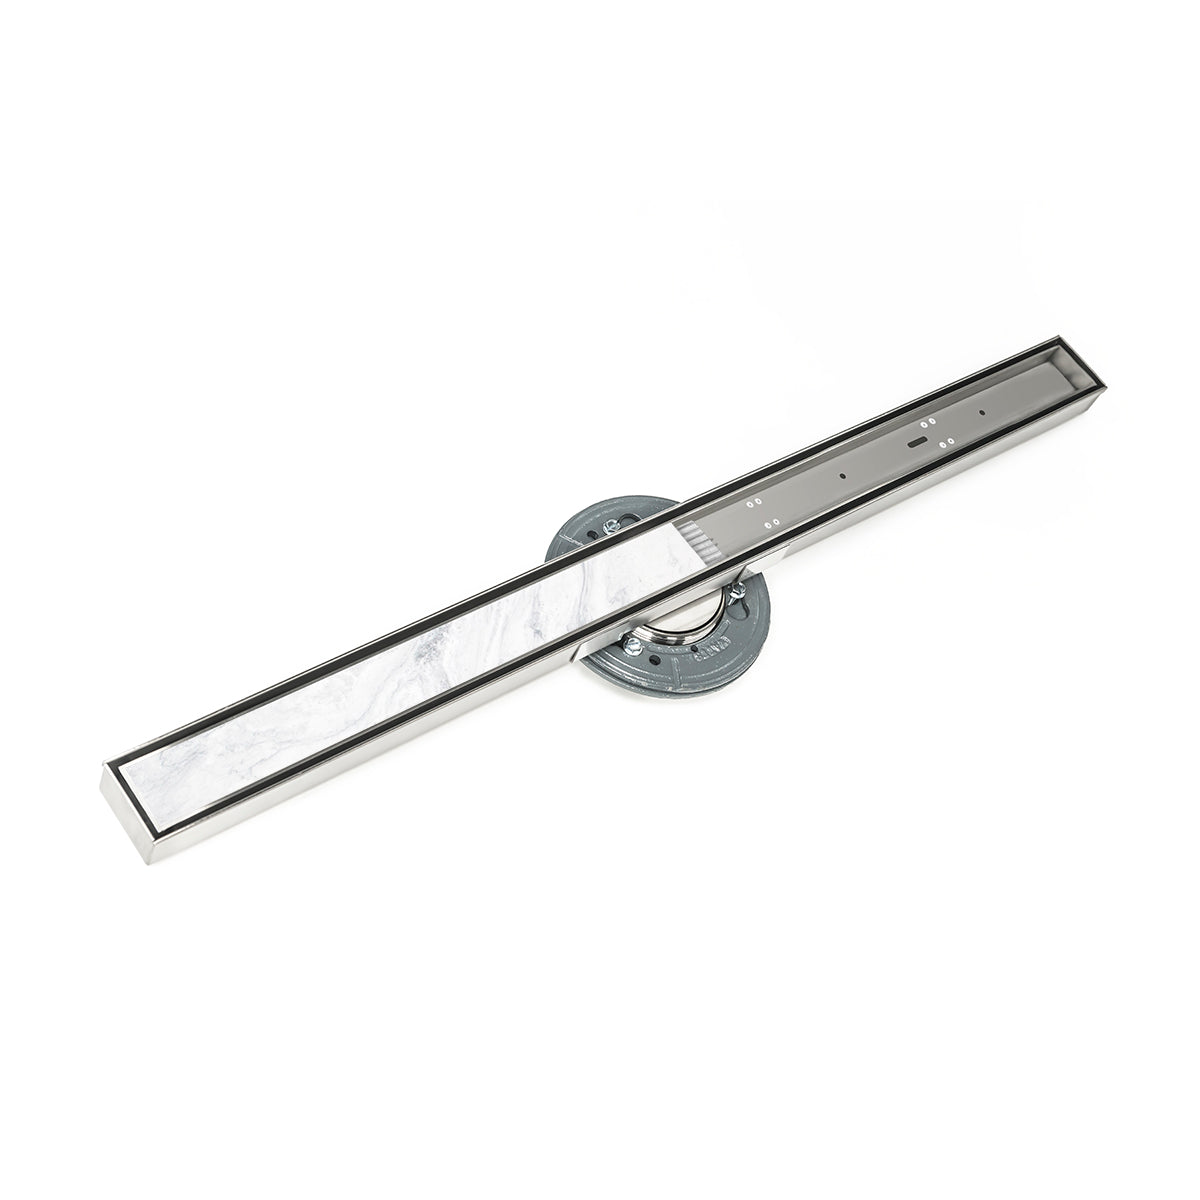 Infinity Drain 60" S-Stainless Steel Series High Flow Site Sizable Linear Drain Kit with Tile Insert Frame with Cast Iron Drain Body, 3" No Hub Outlet